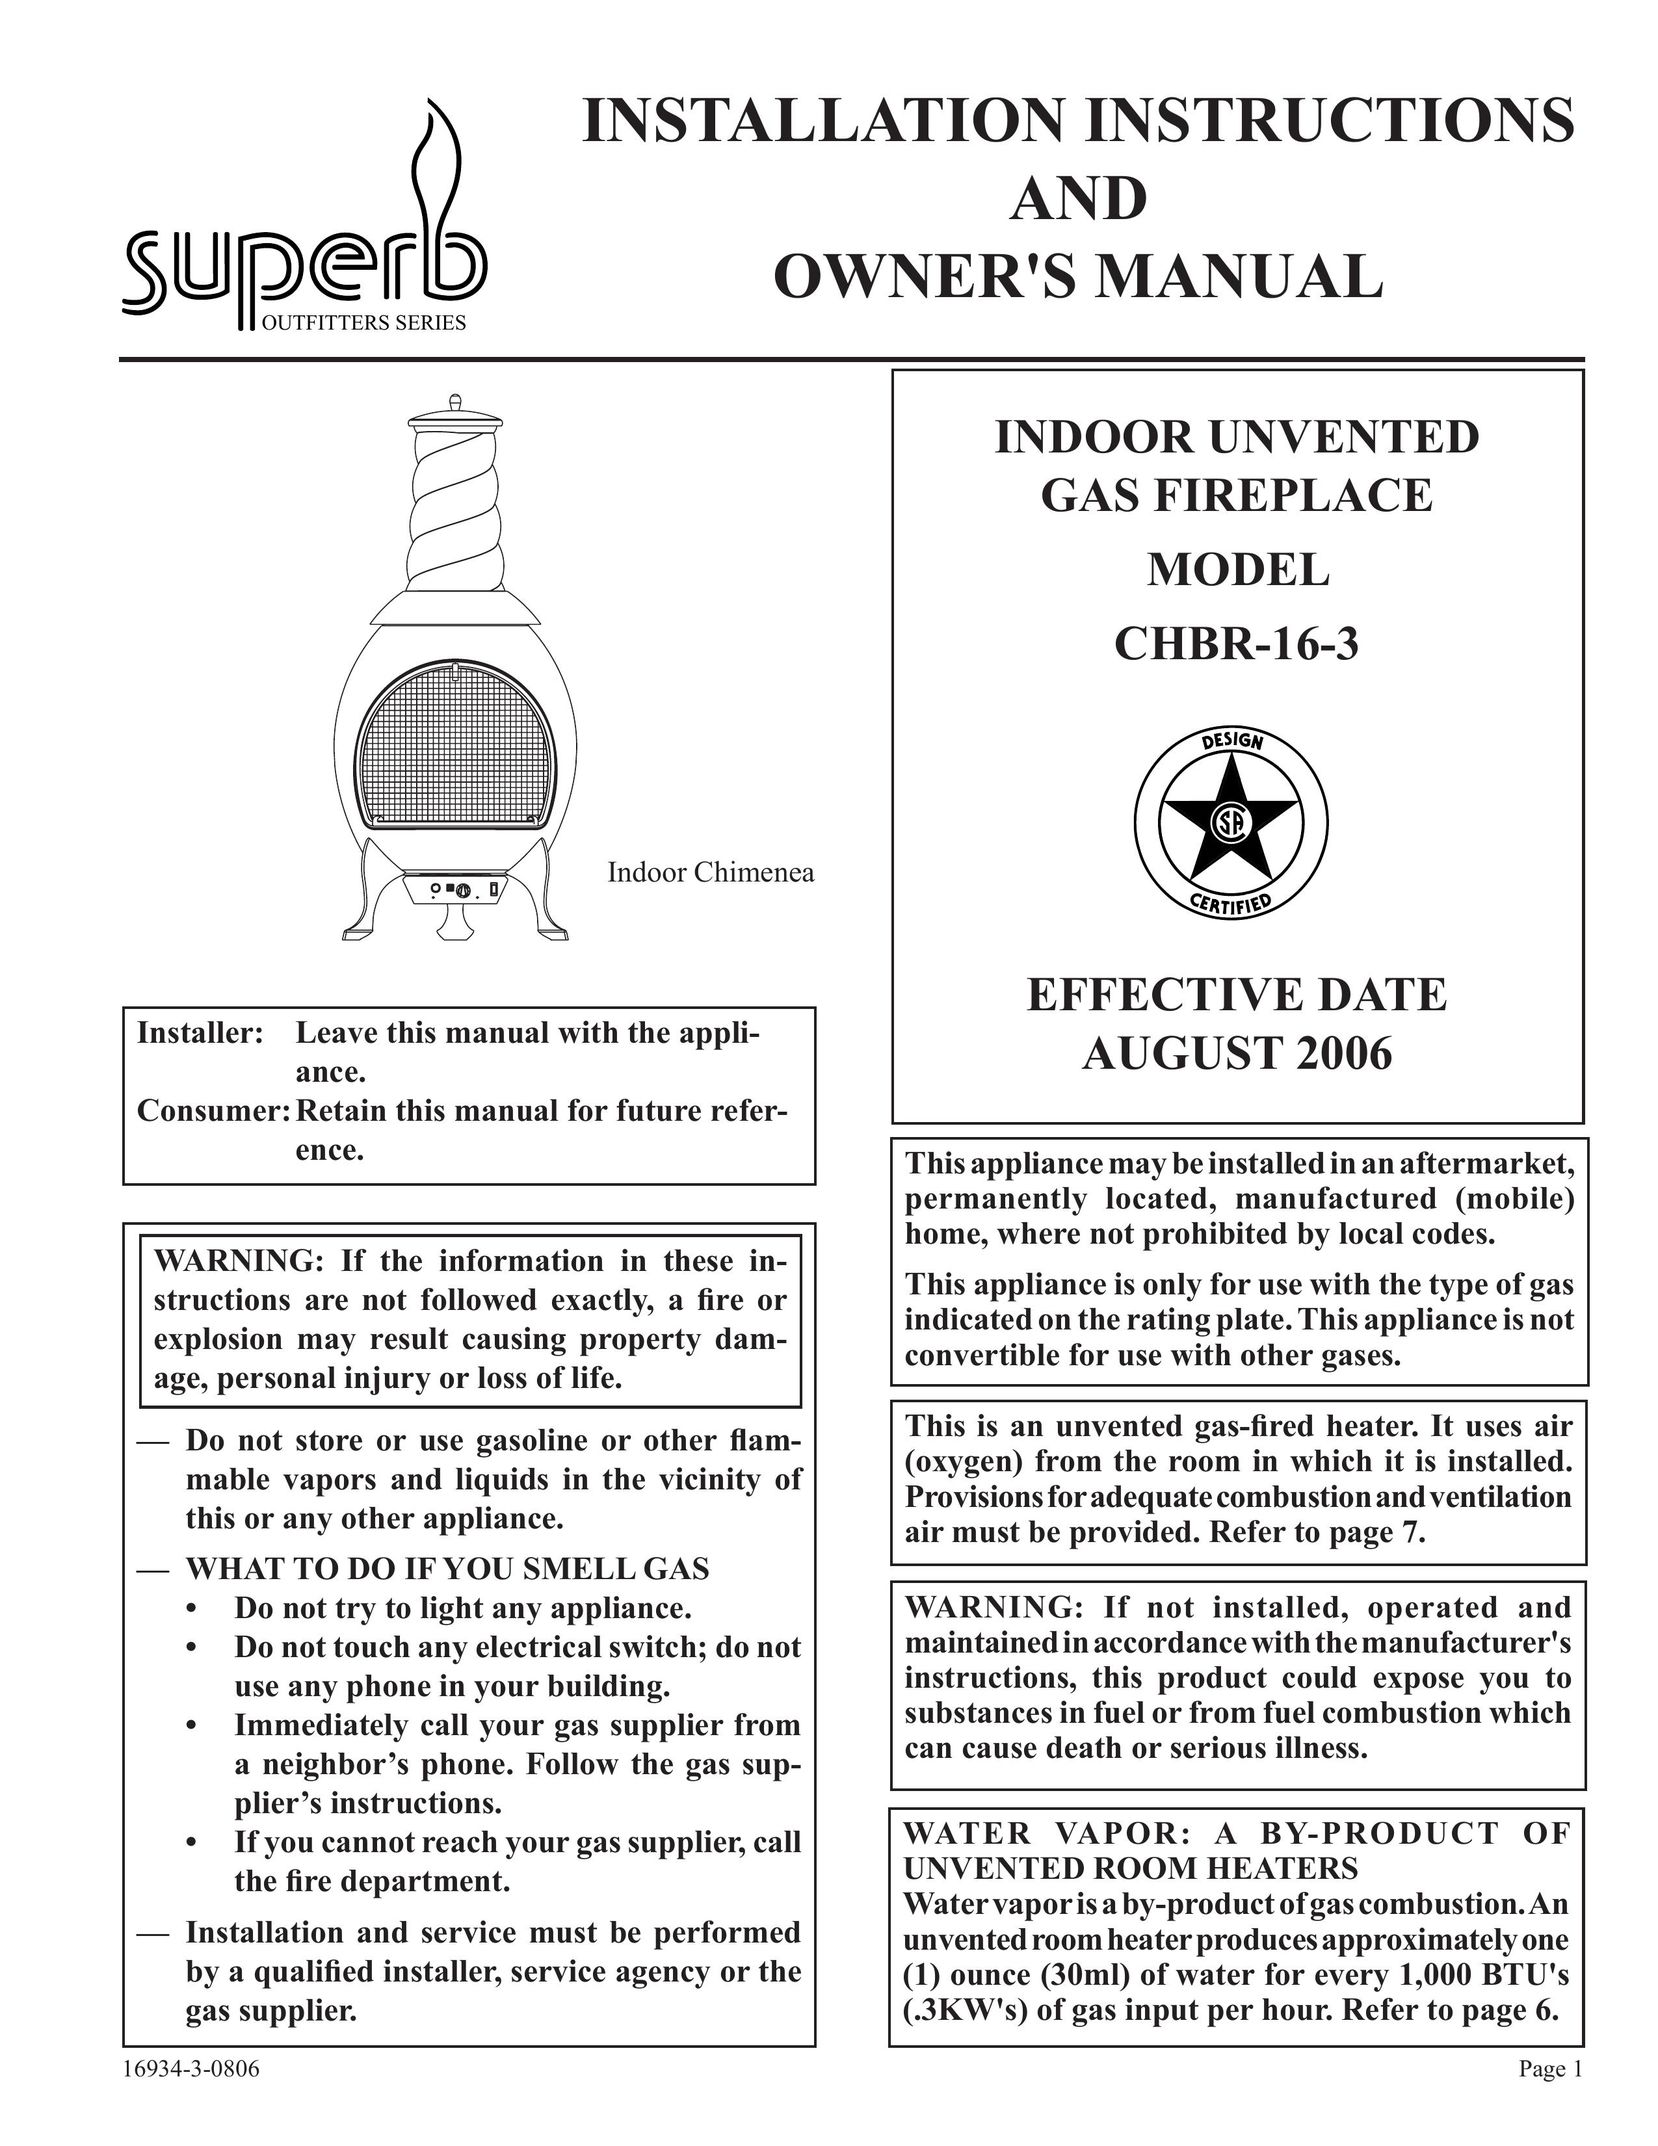 Empire Comfort Systems CHBR-16-3 Indoor Fireplace User Manual